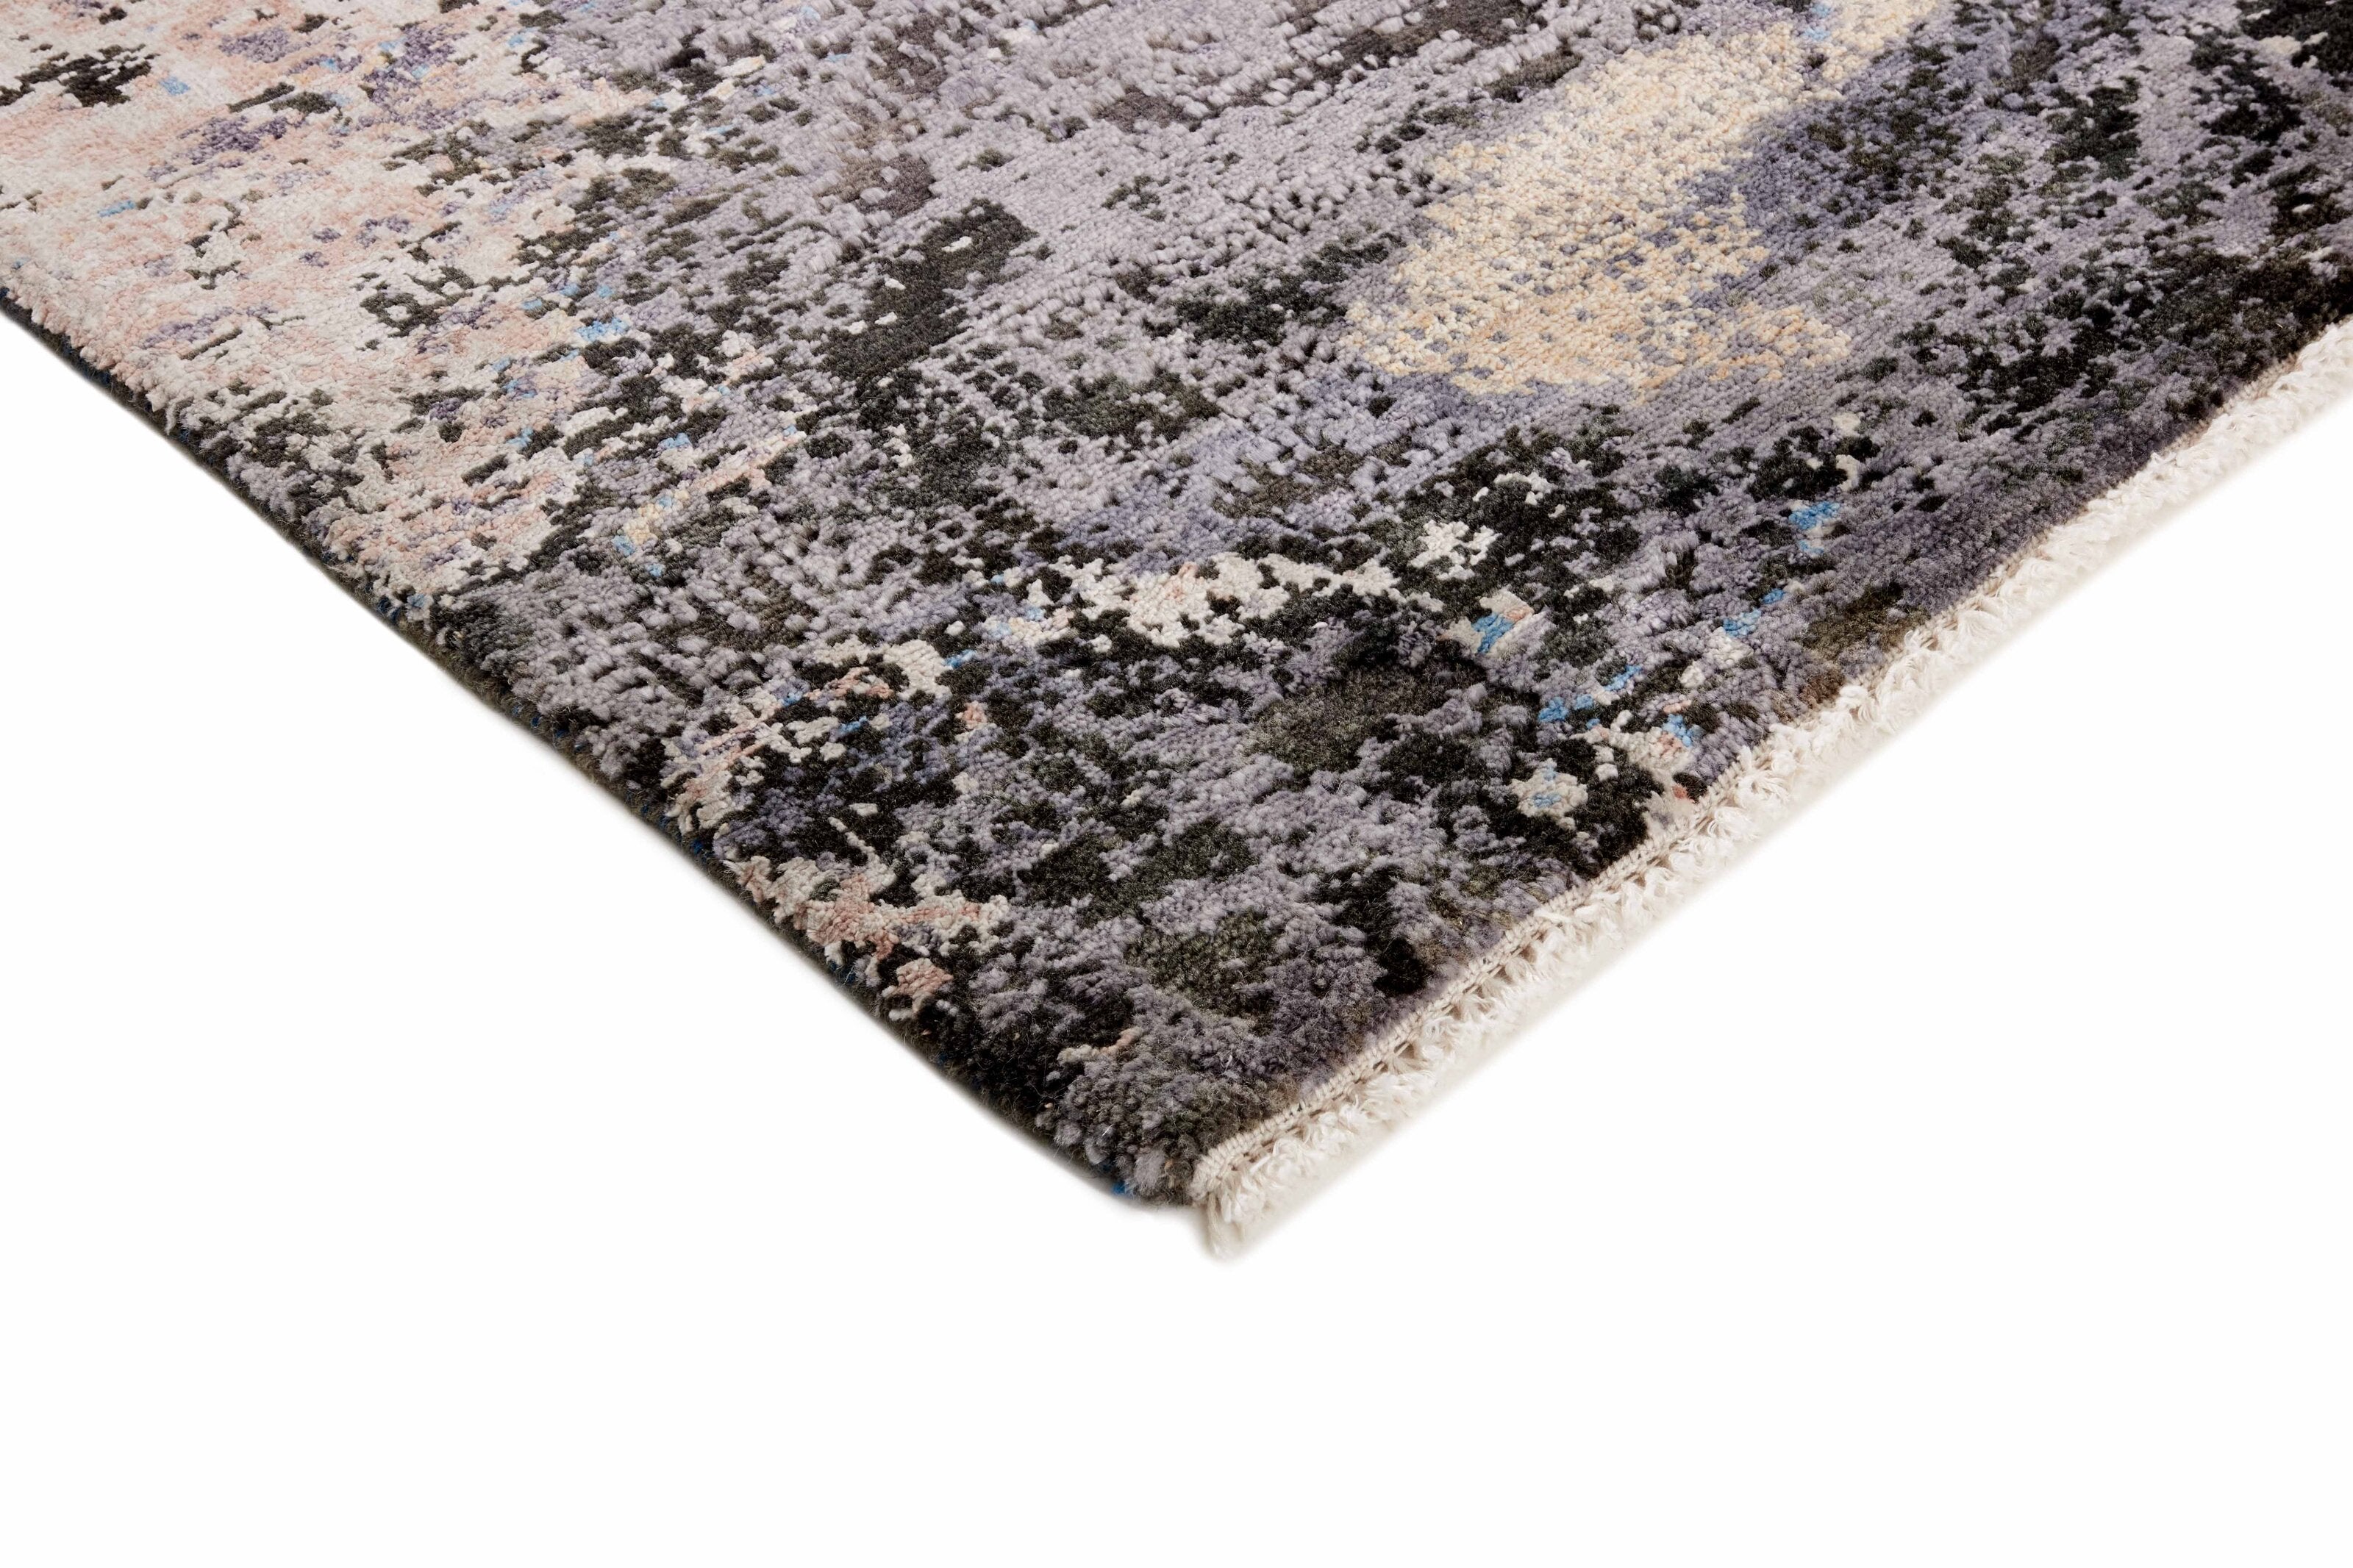 Large area rug with abstract design in grey, beige and blue